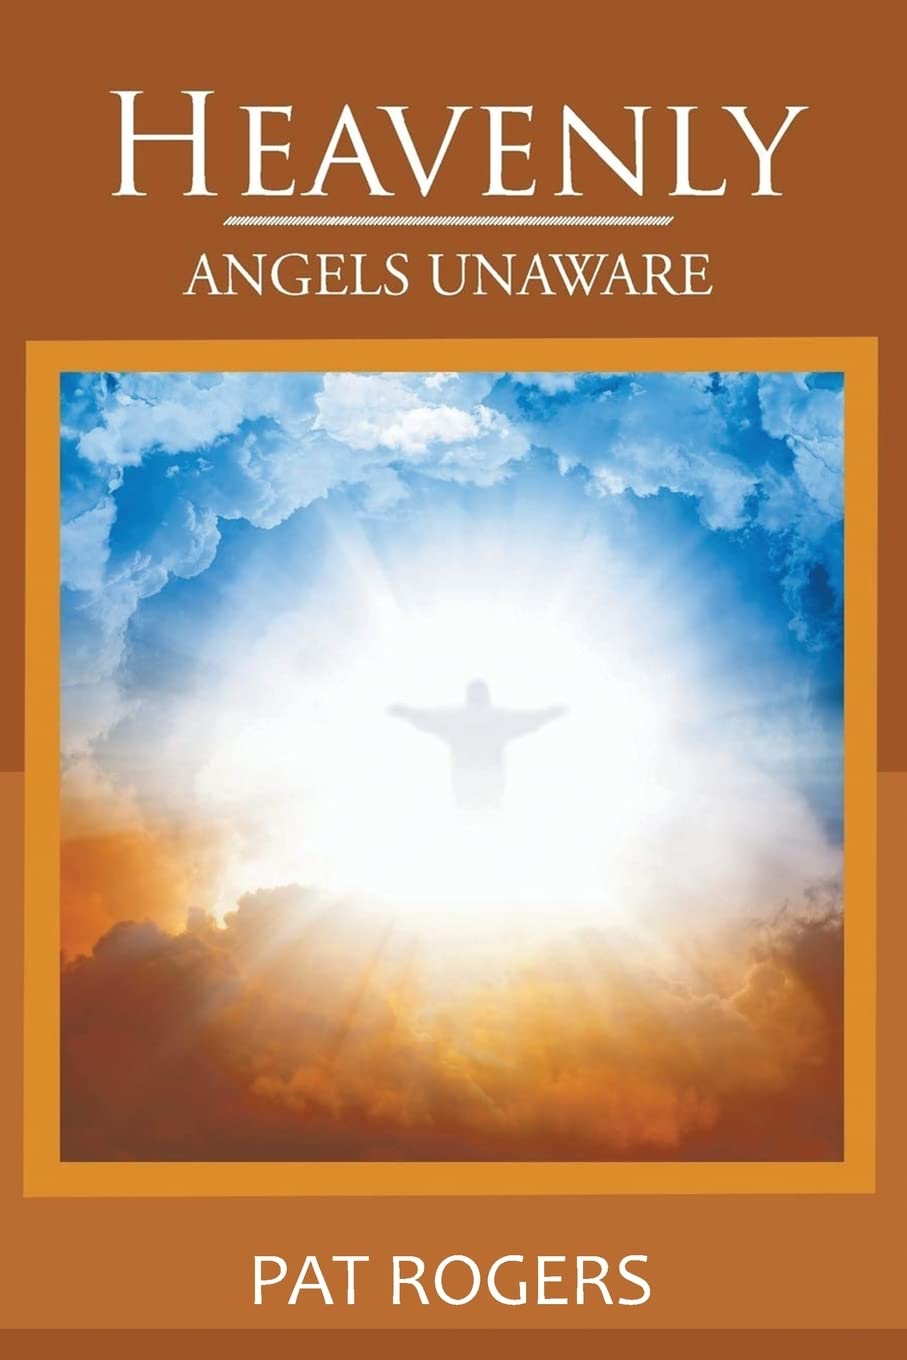 Author's Tranquility Press Publishes Pat Rogers’ Spiritual Collection - Heavenly: Angels Unaware